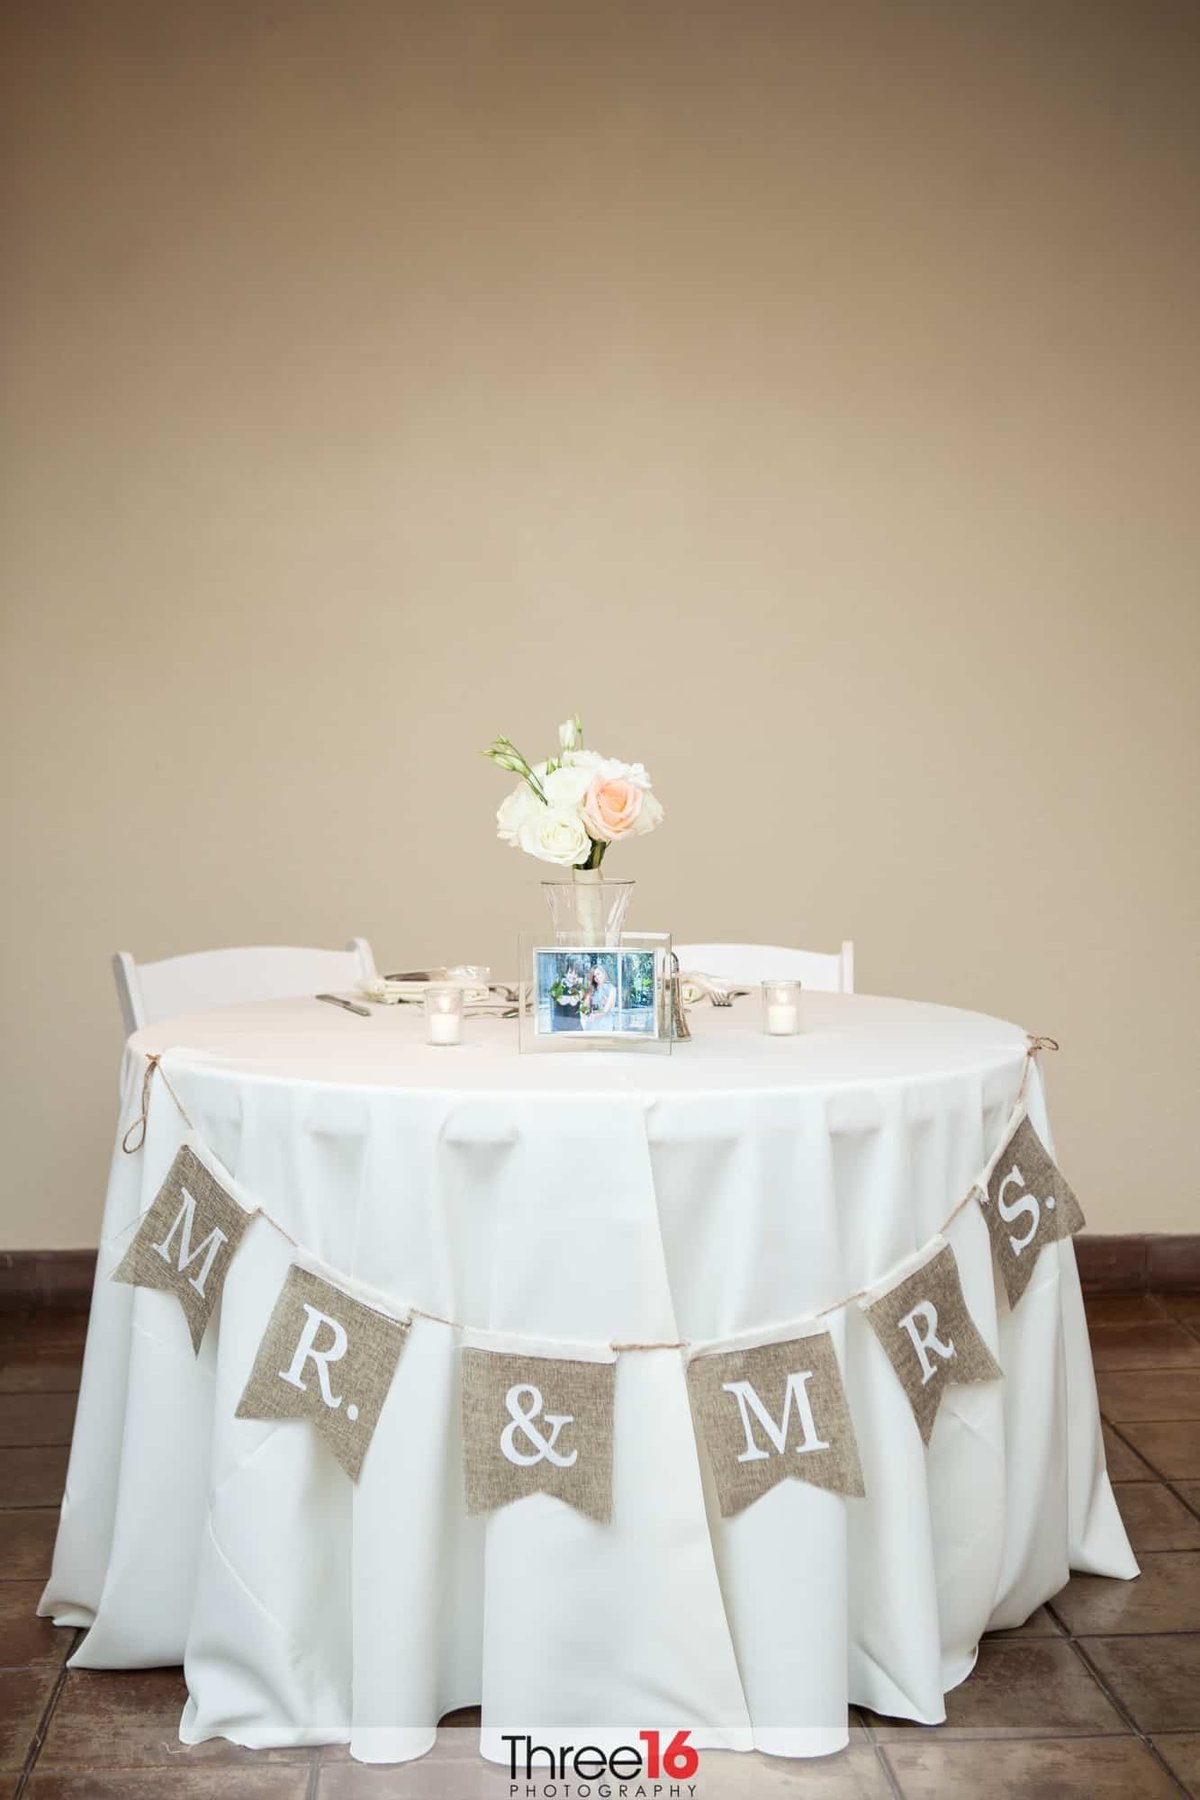 Mr & Mrs Sweetheart Table at wedding reception